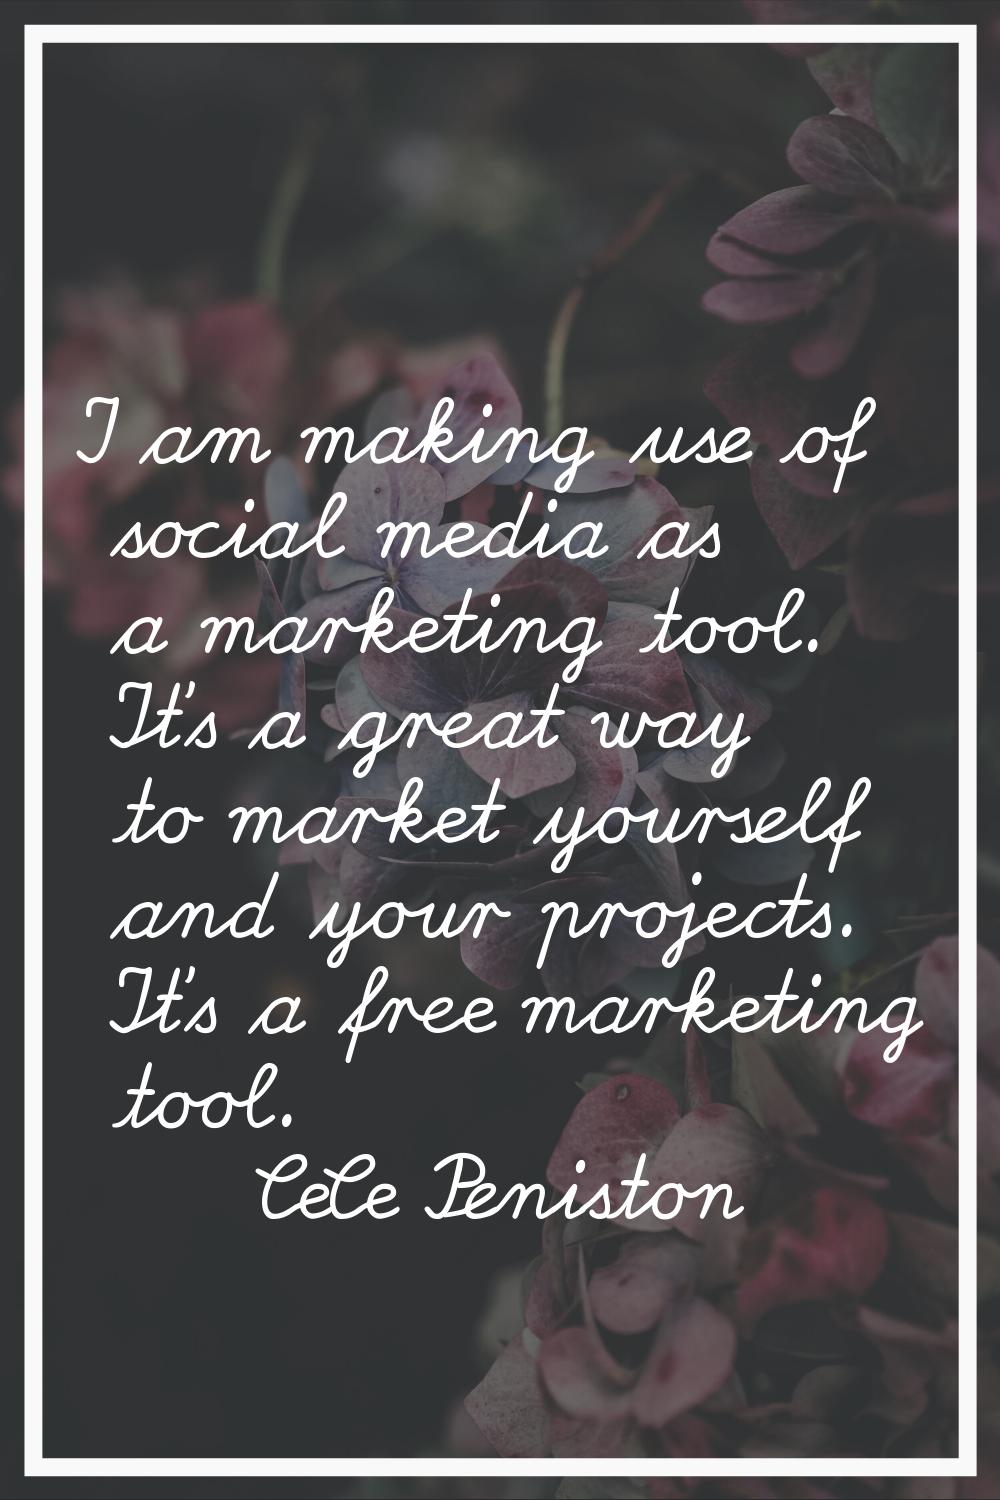 I am making use of social media as a marketing tool. It's a great way to market yourself and your p